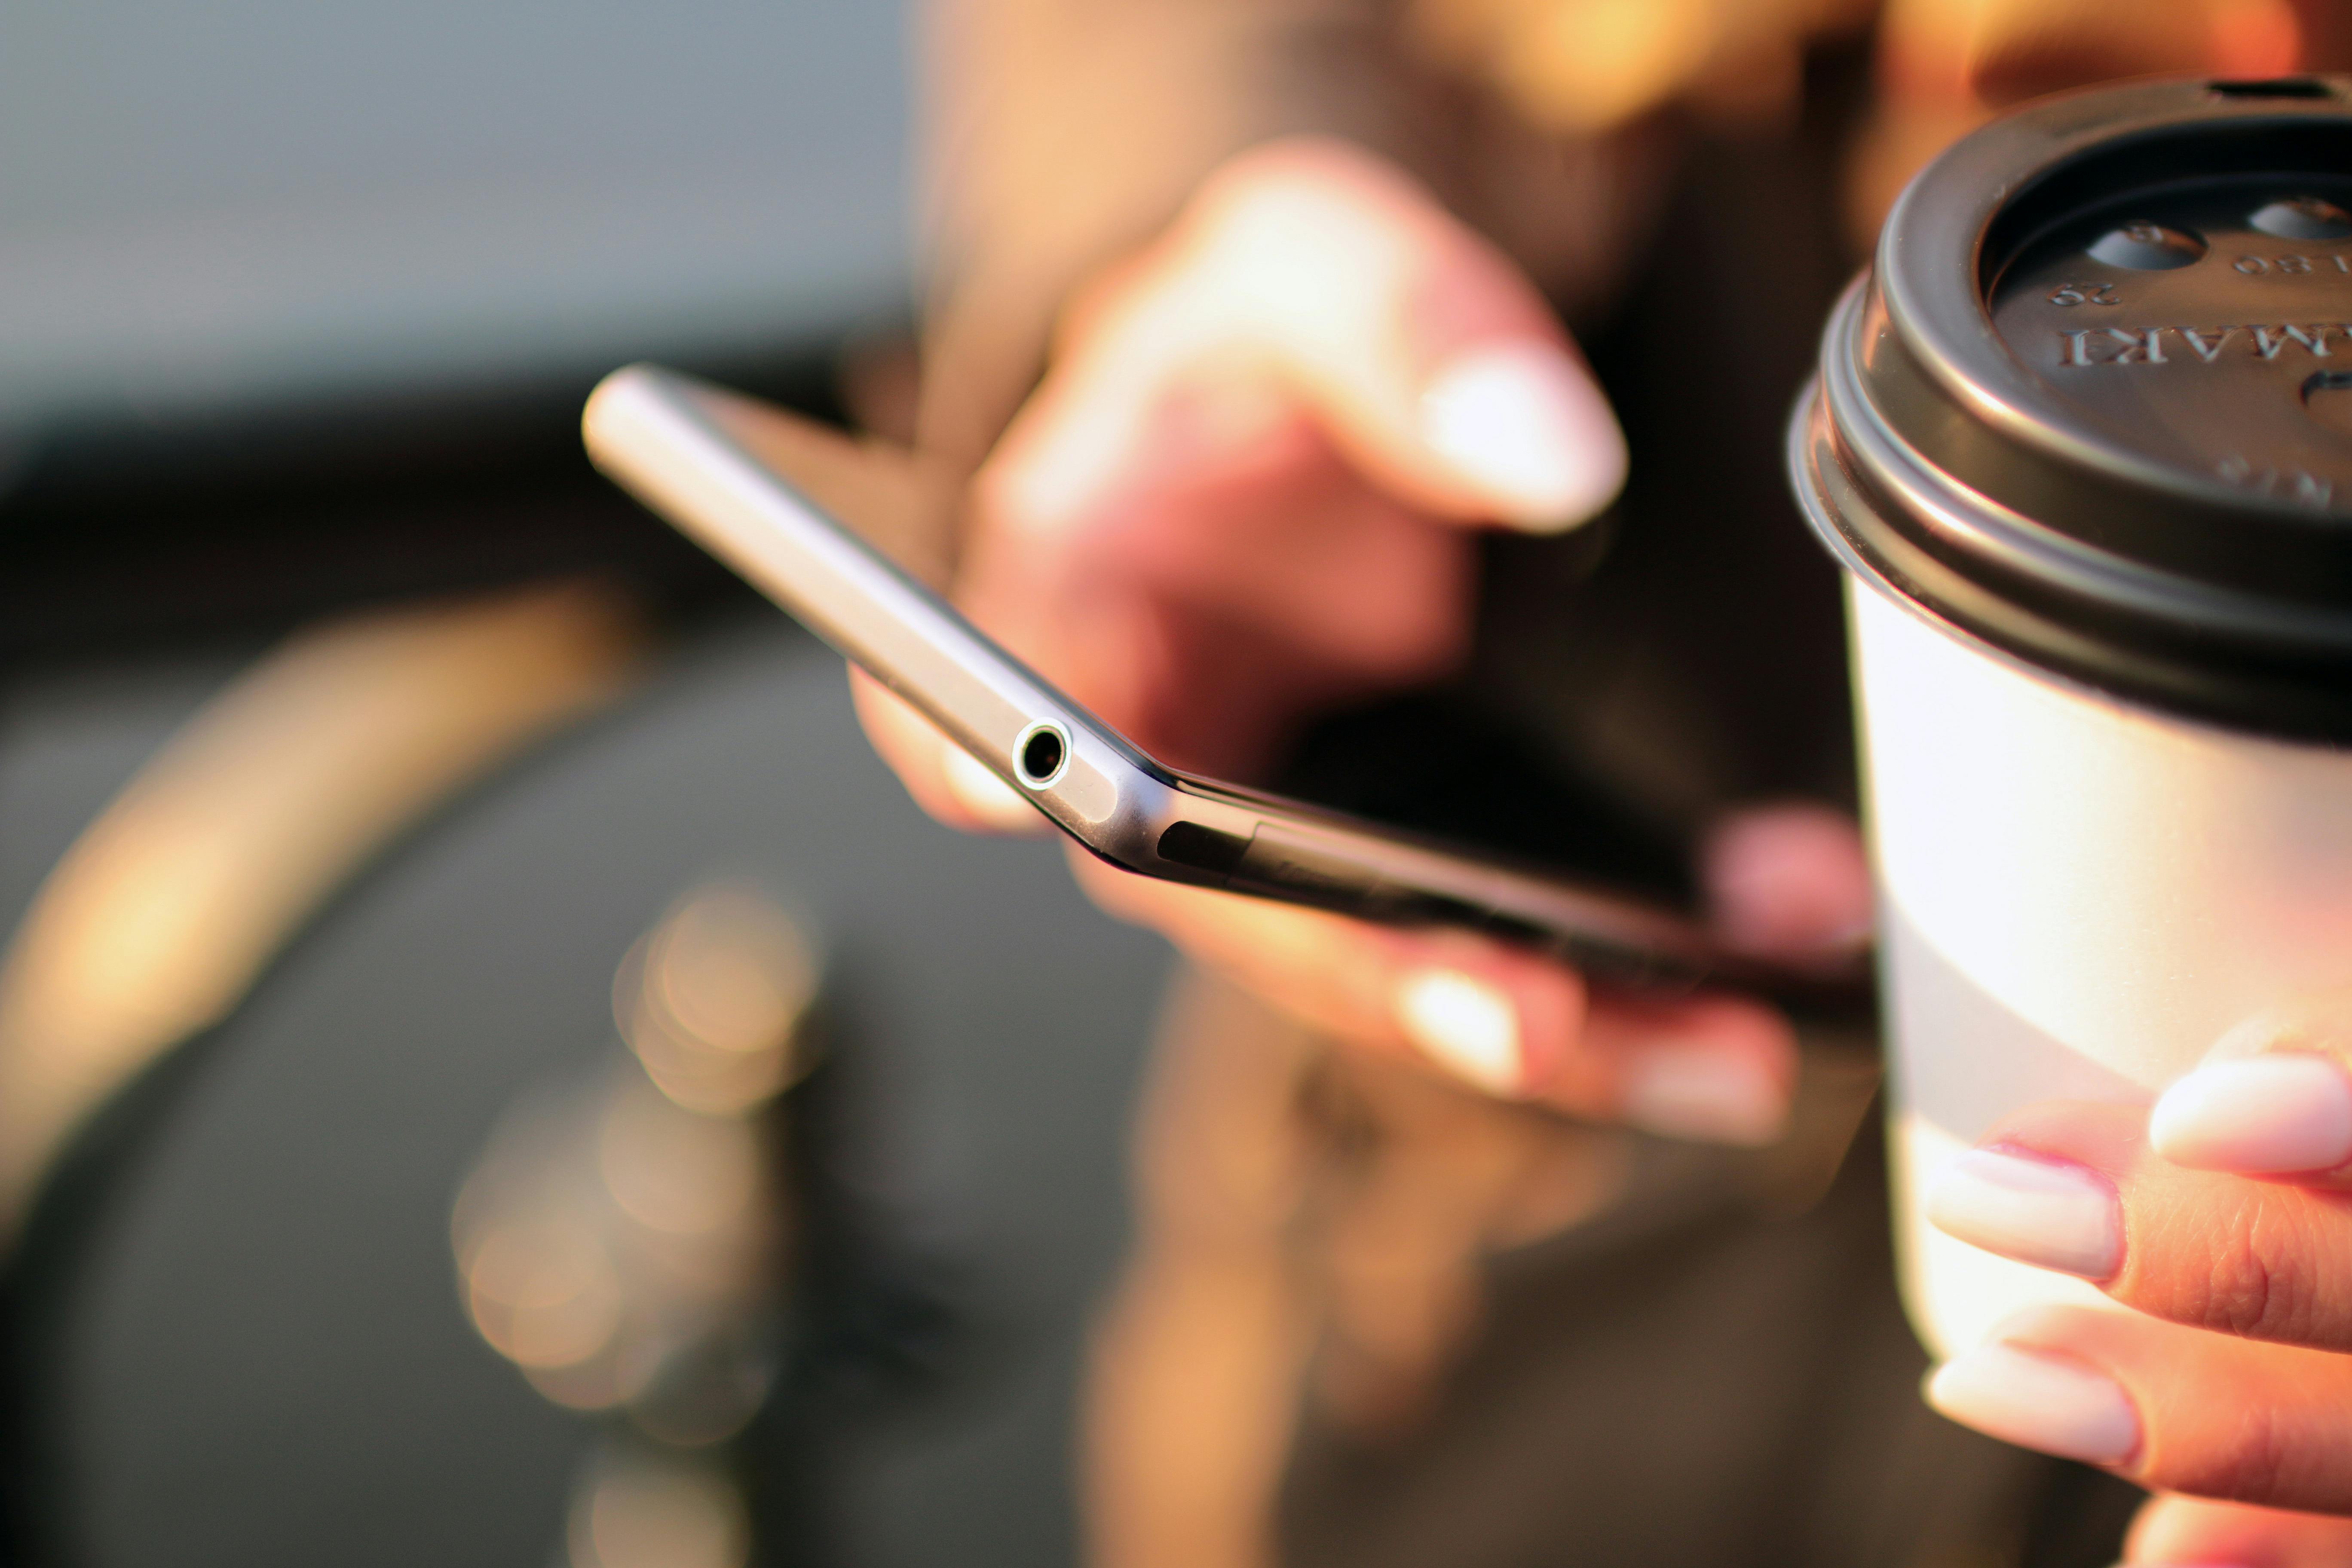 For illustration purposes only. Woman reads text on her phone while drinking coffee | Source: Pexels